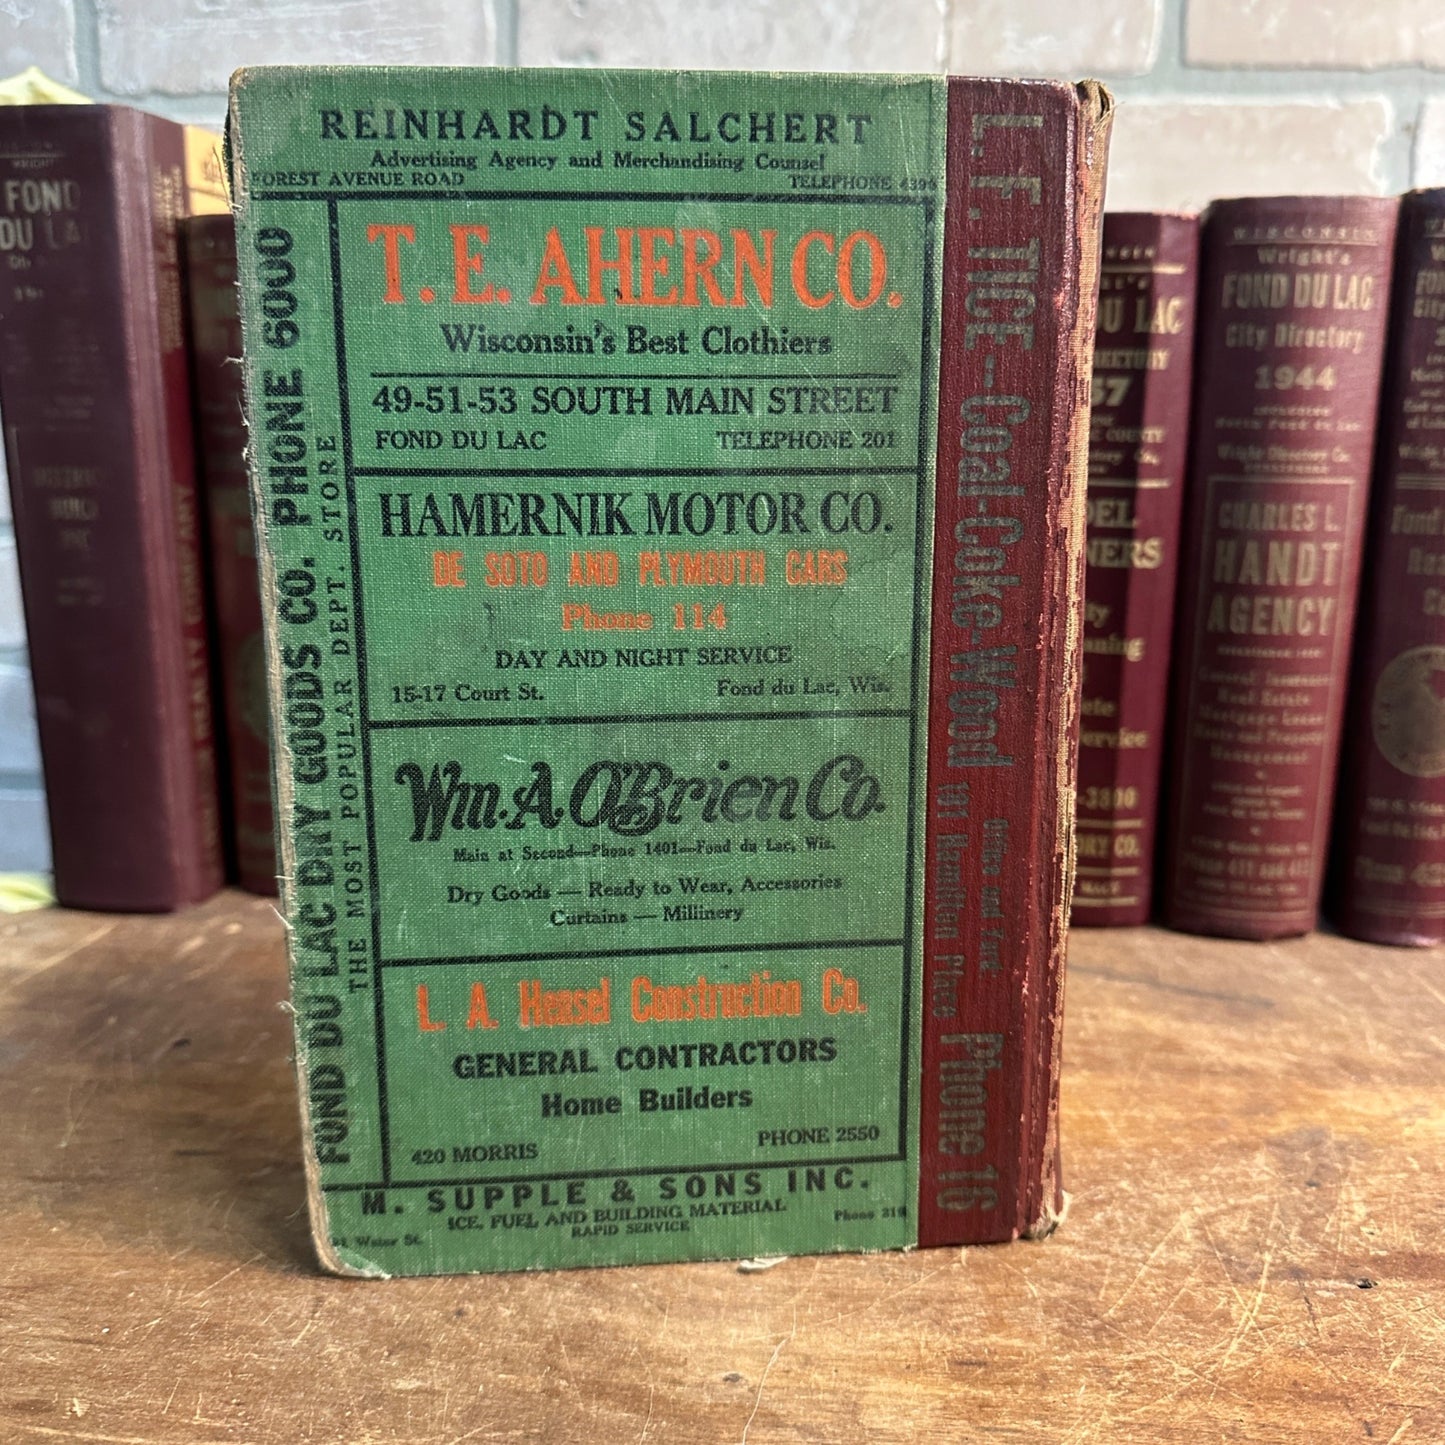 1934 FOND DU LAC CITY DIRECTORY WISCONSIN BUSINESS DIRECTORY ADVERTISING